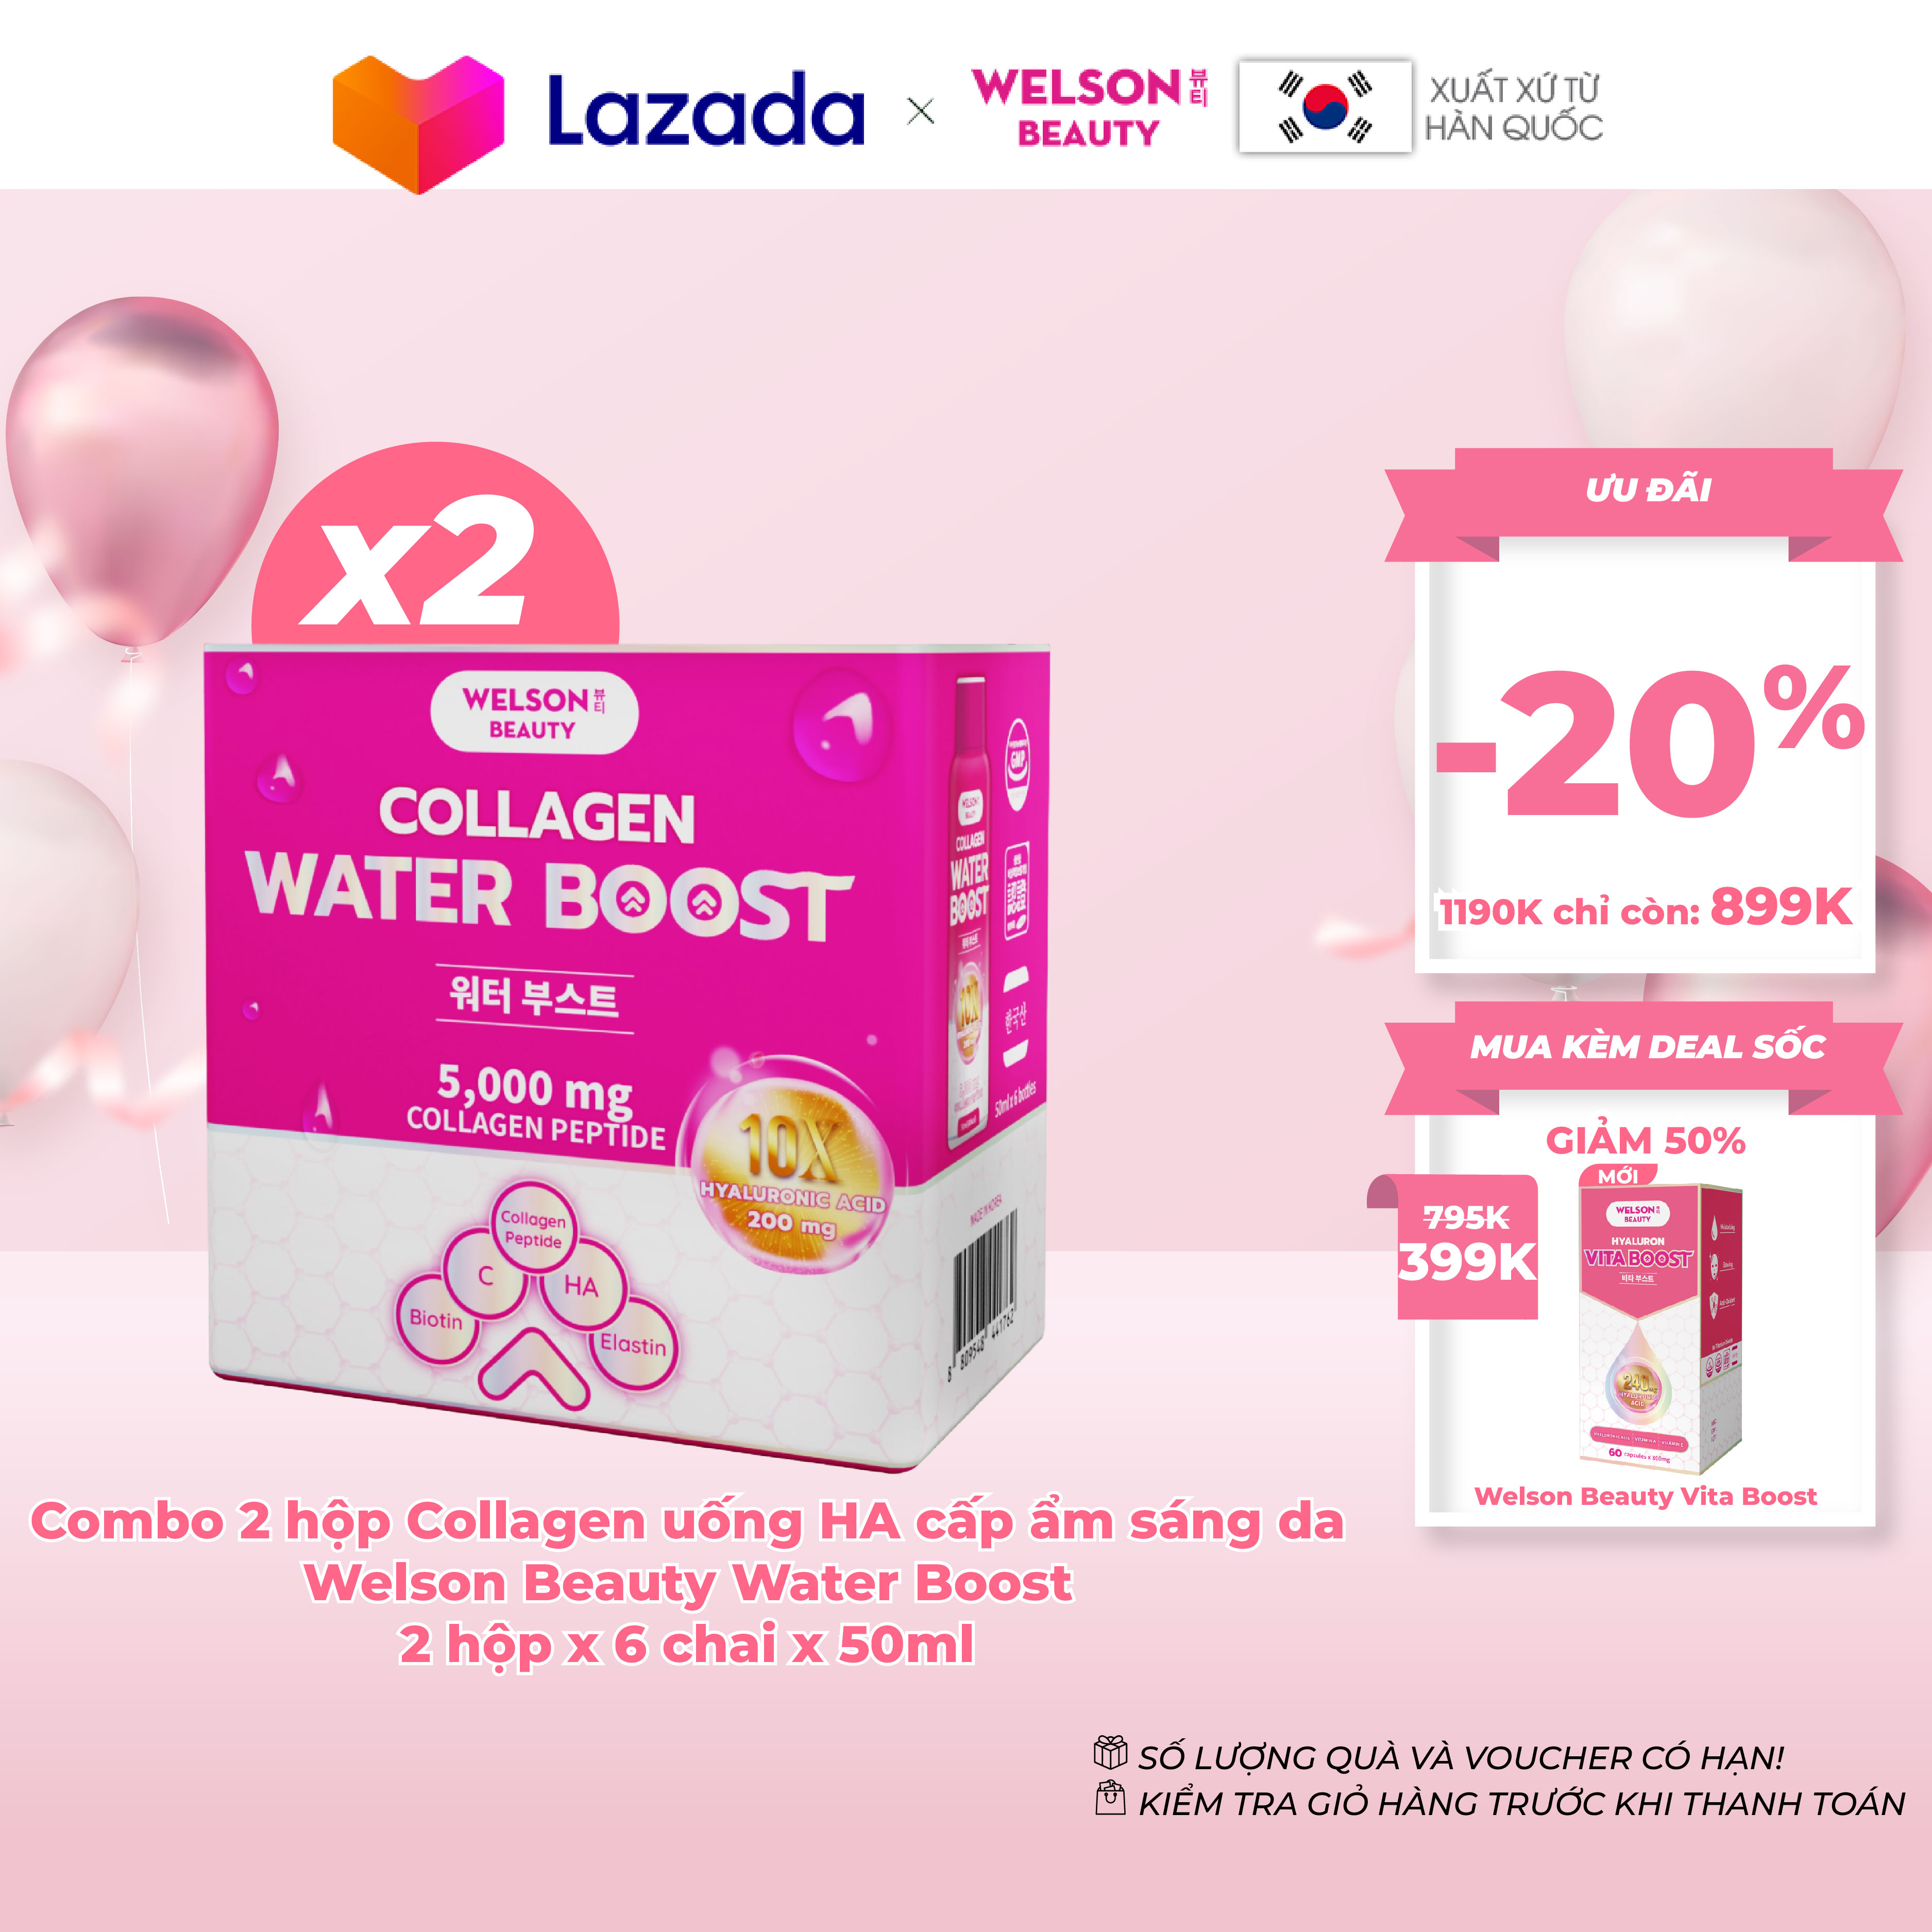 Combo 2 Hộp Collagen uống HA cấp ẩm sáng da Welson Beauty Water Boost 2 x